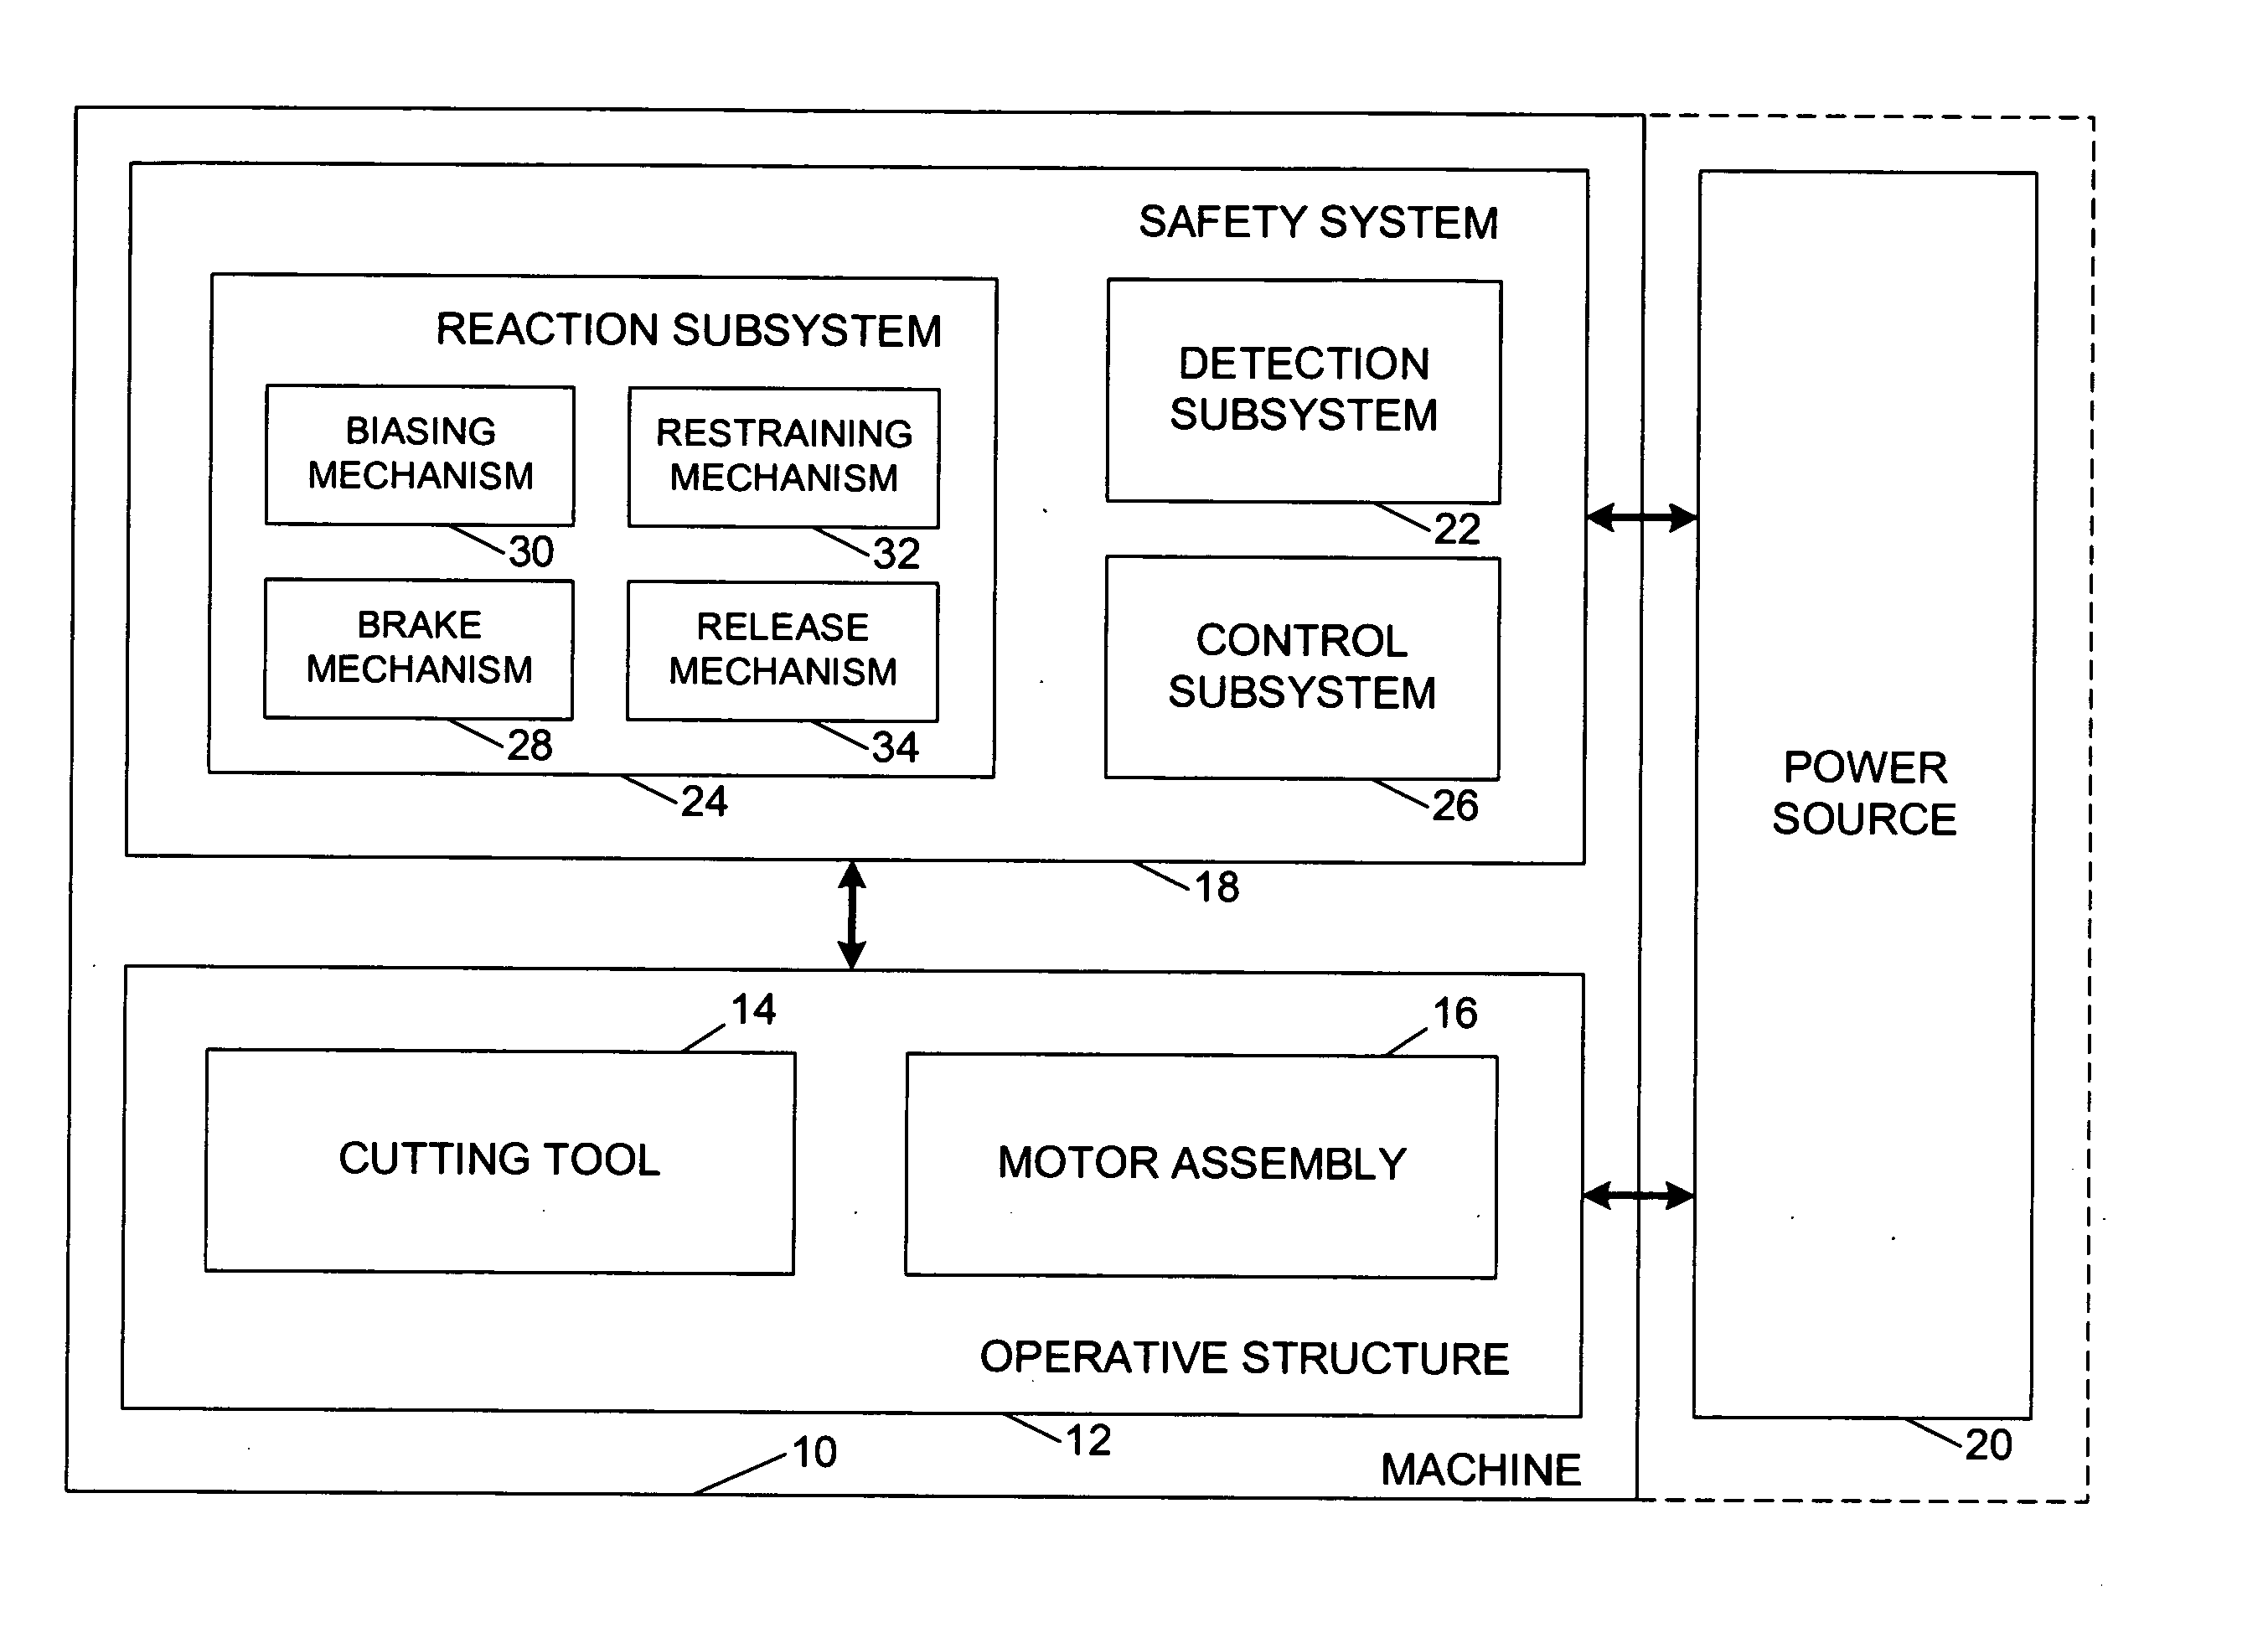 Detection system for power equipment